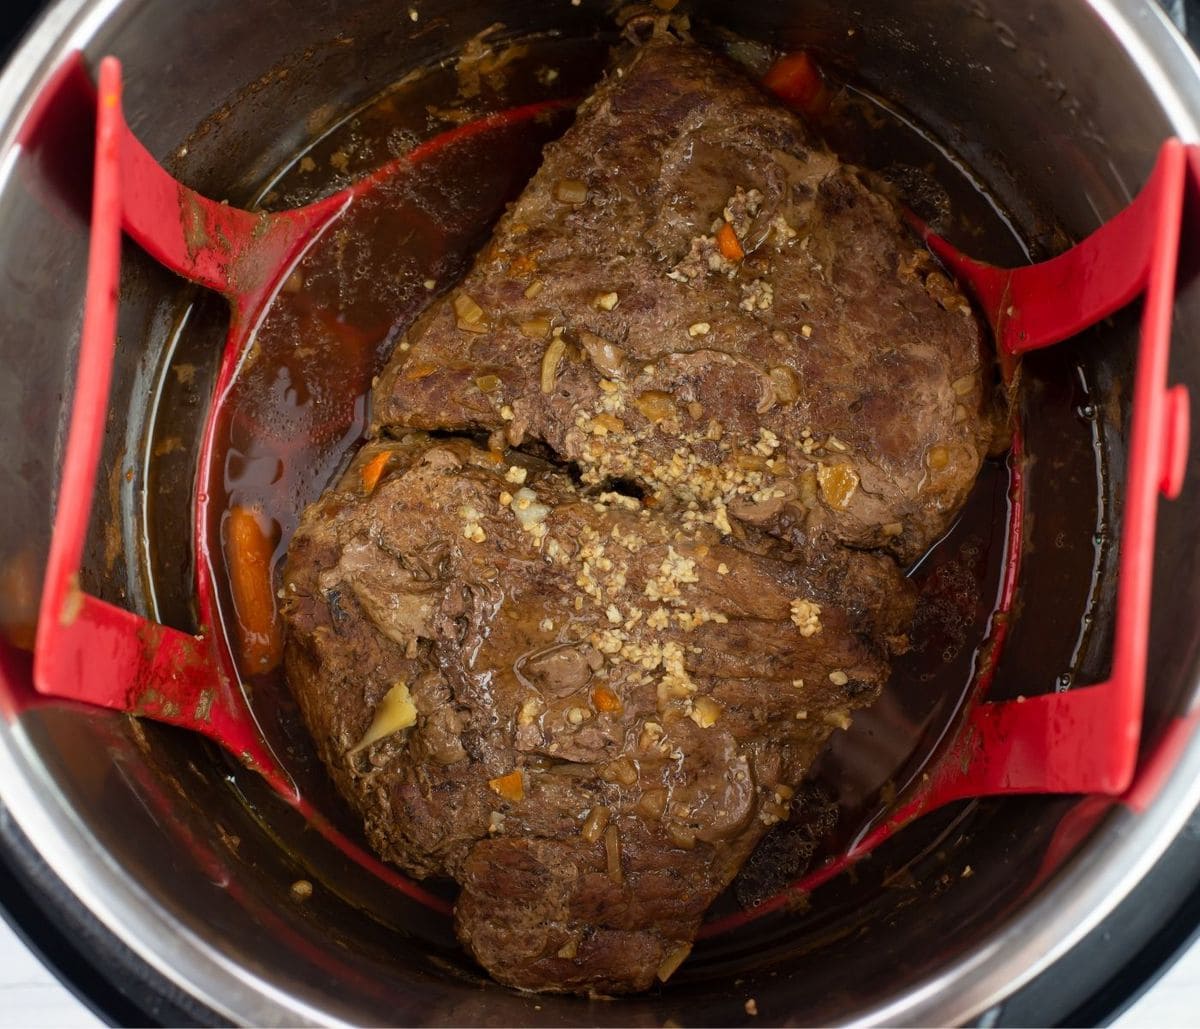 How To Fix London Broil In An Electric Pressure Cooker